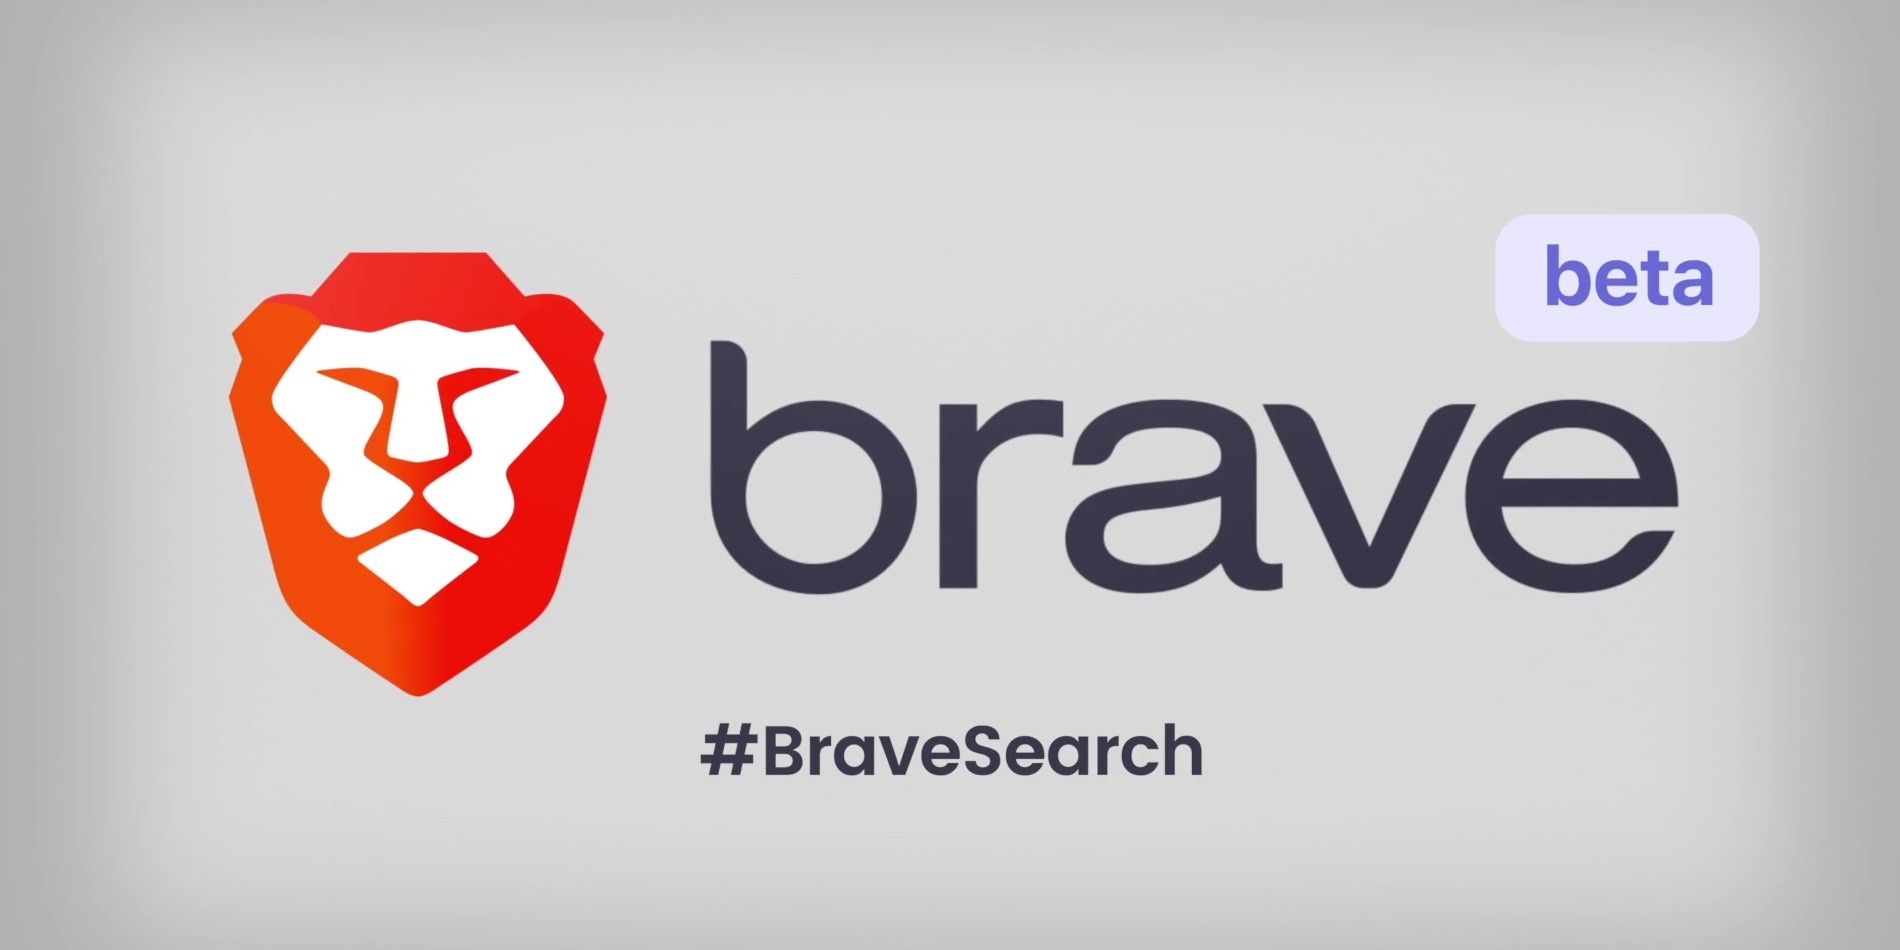 brave search engines